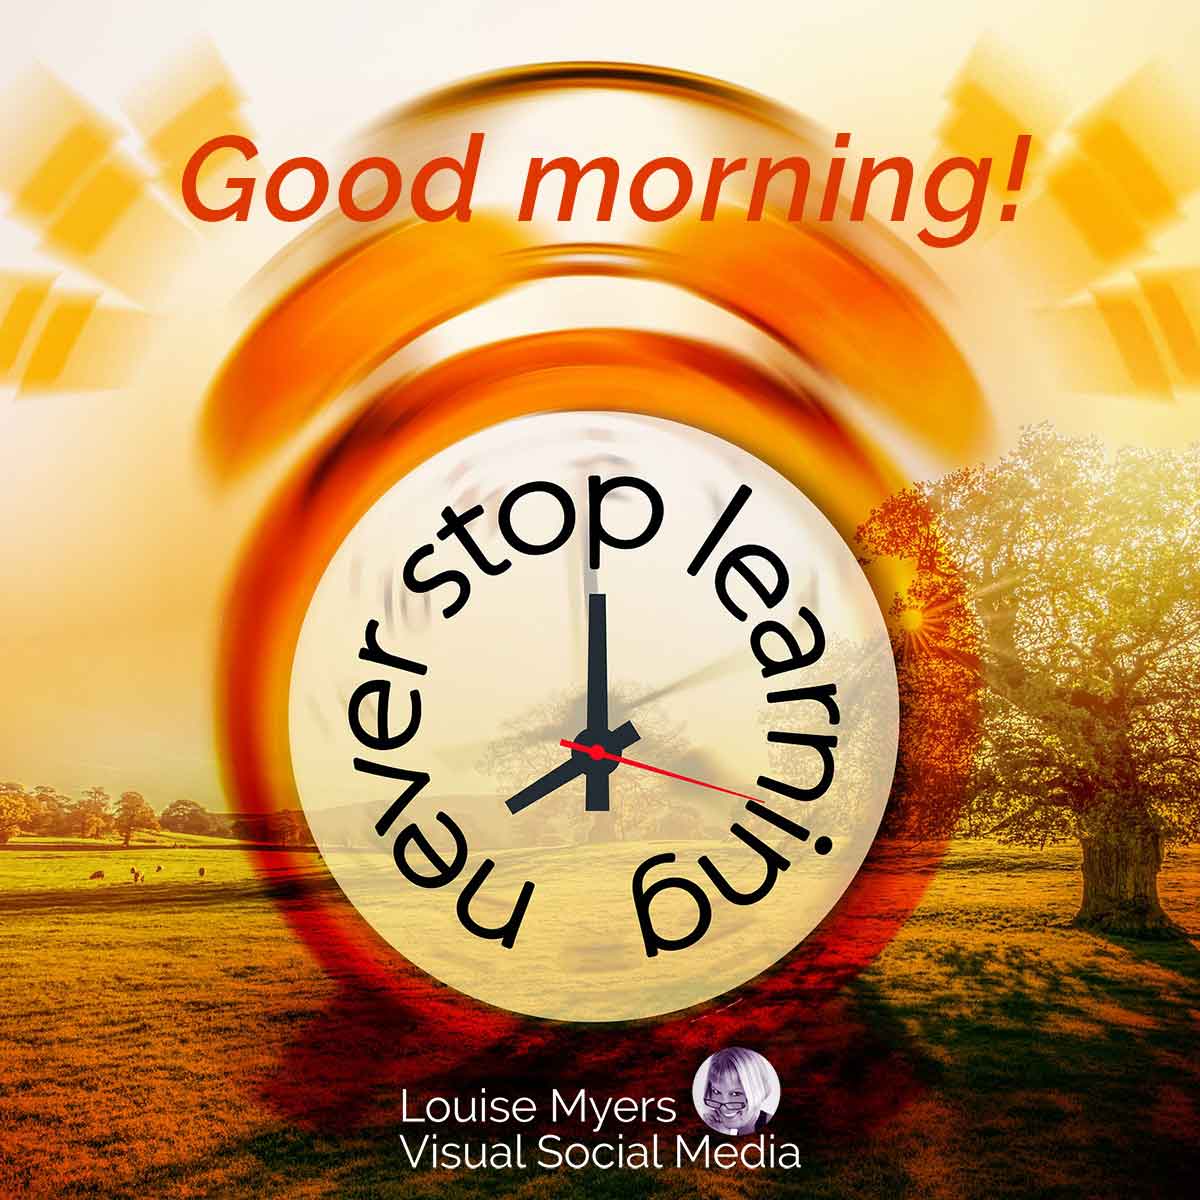 stylized alarm clock says good morning, never stop learning.